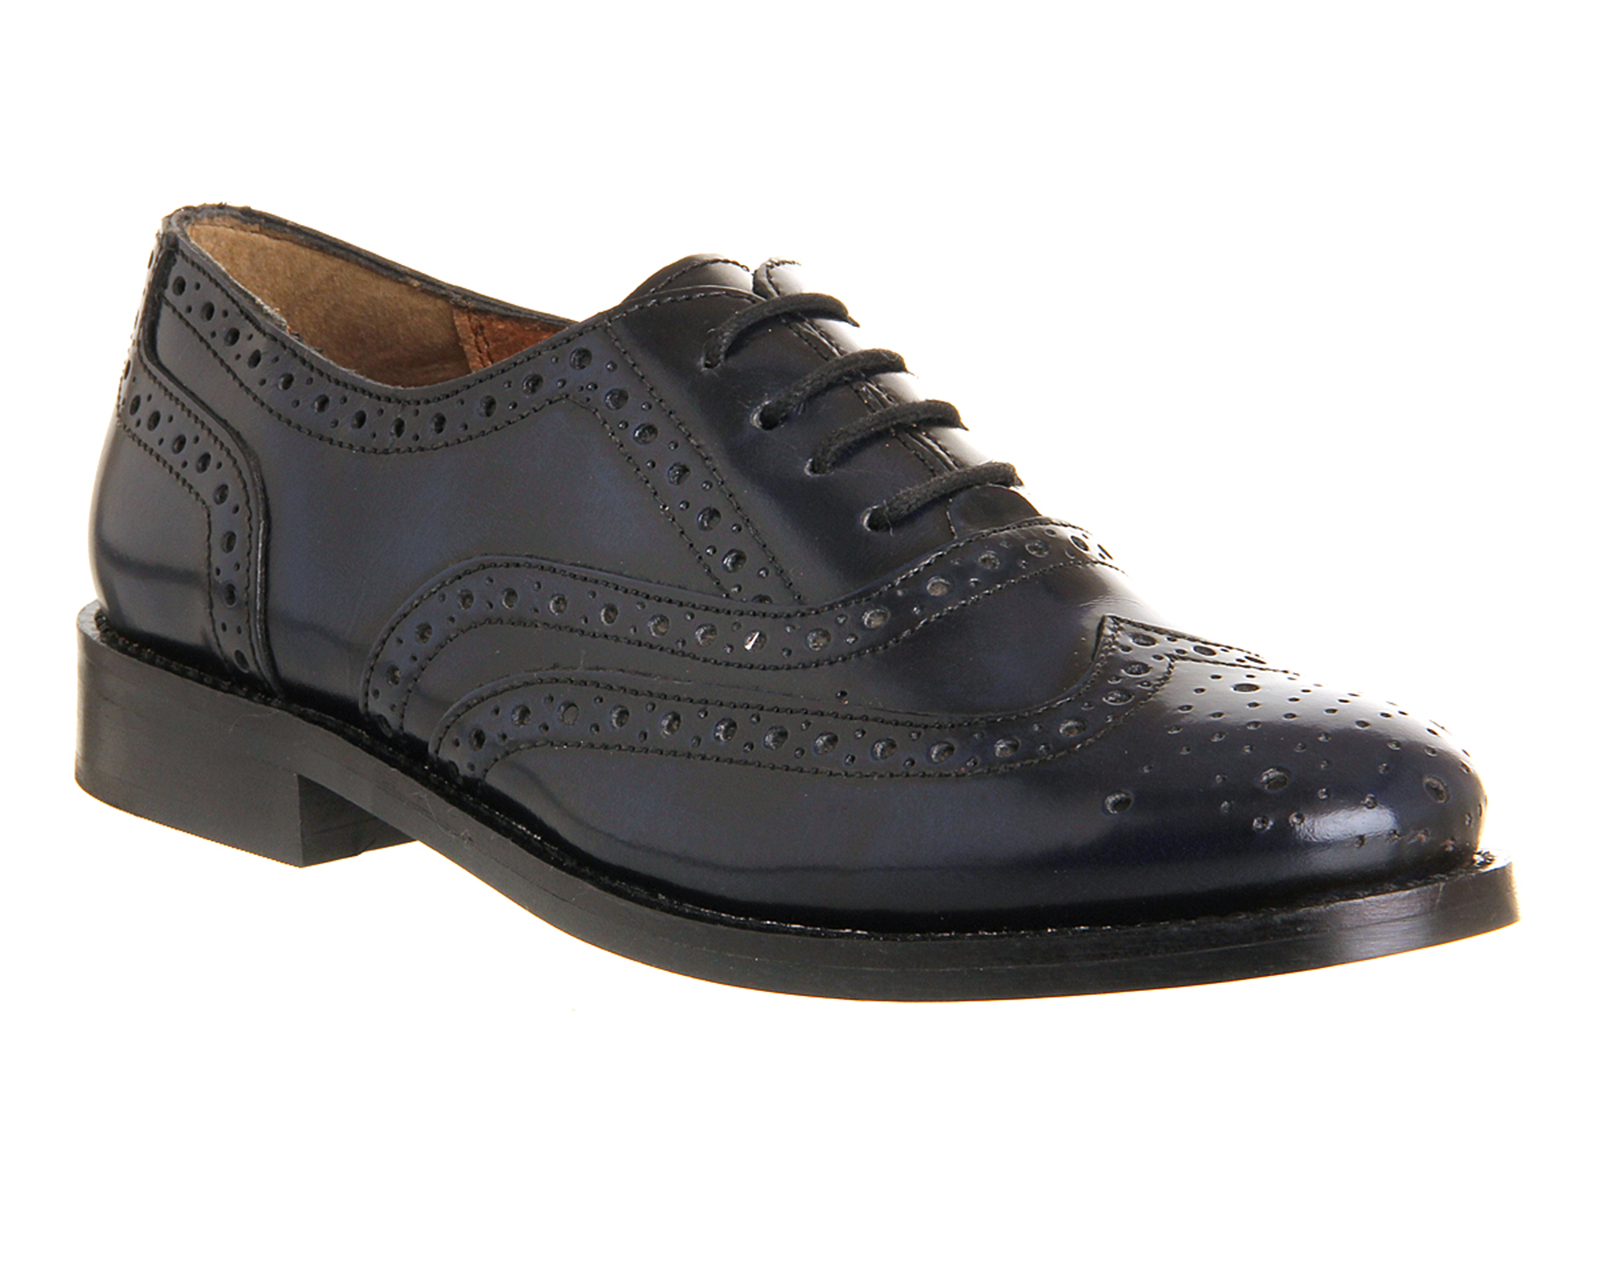 OFFICEVictory Brogue Lace UpNavy Box Leather